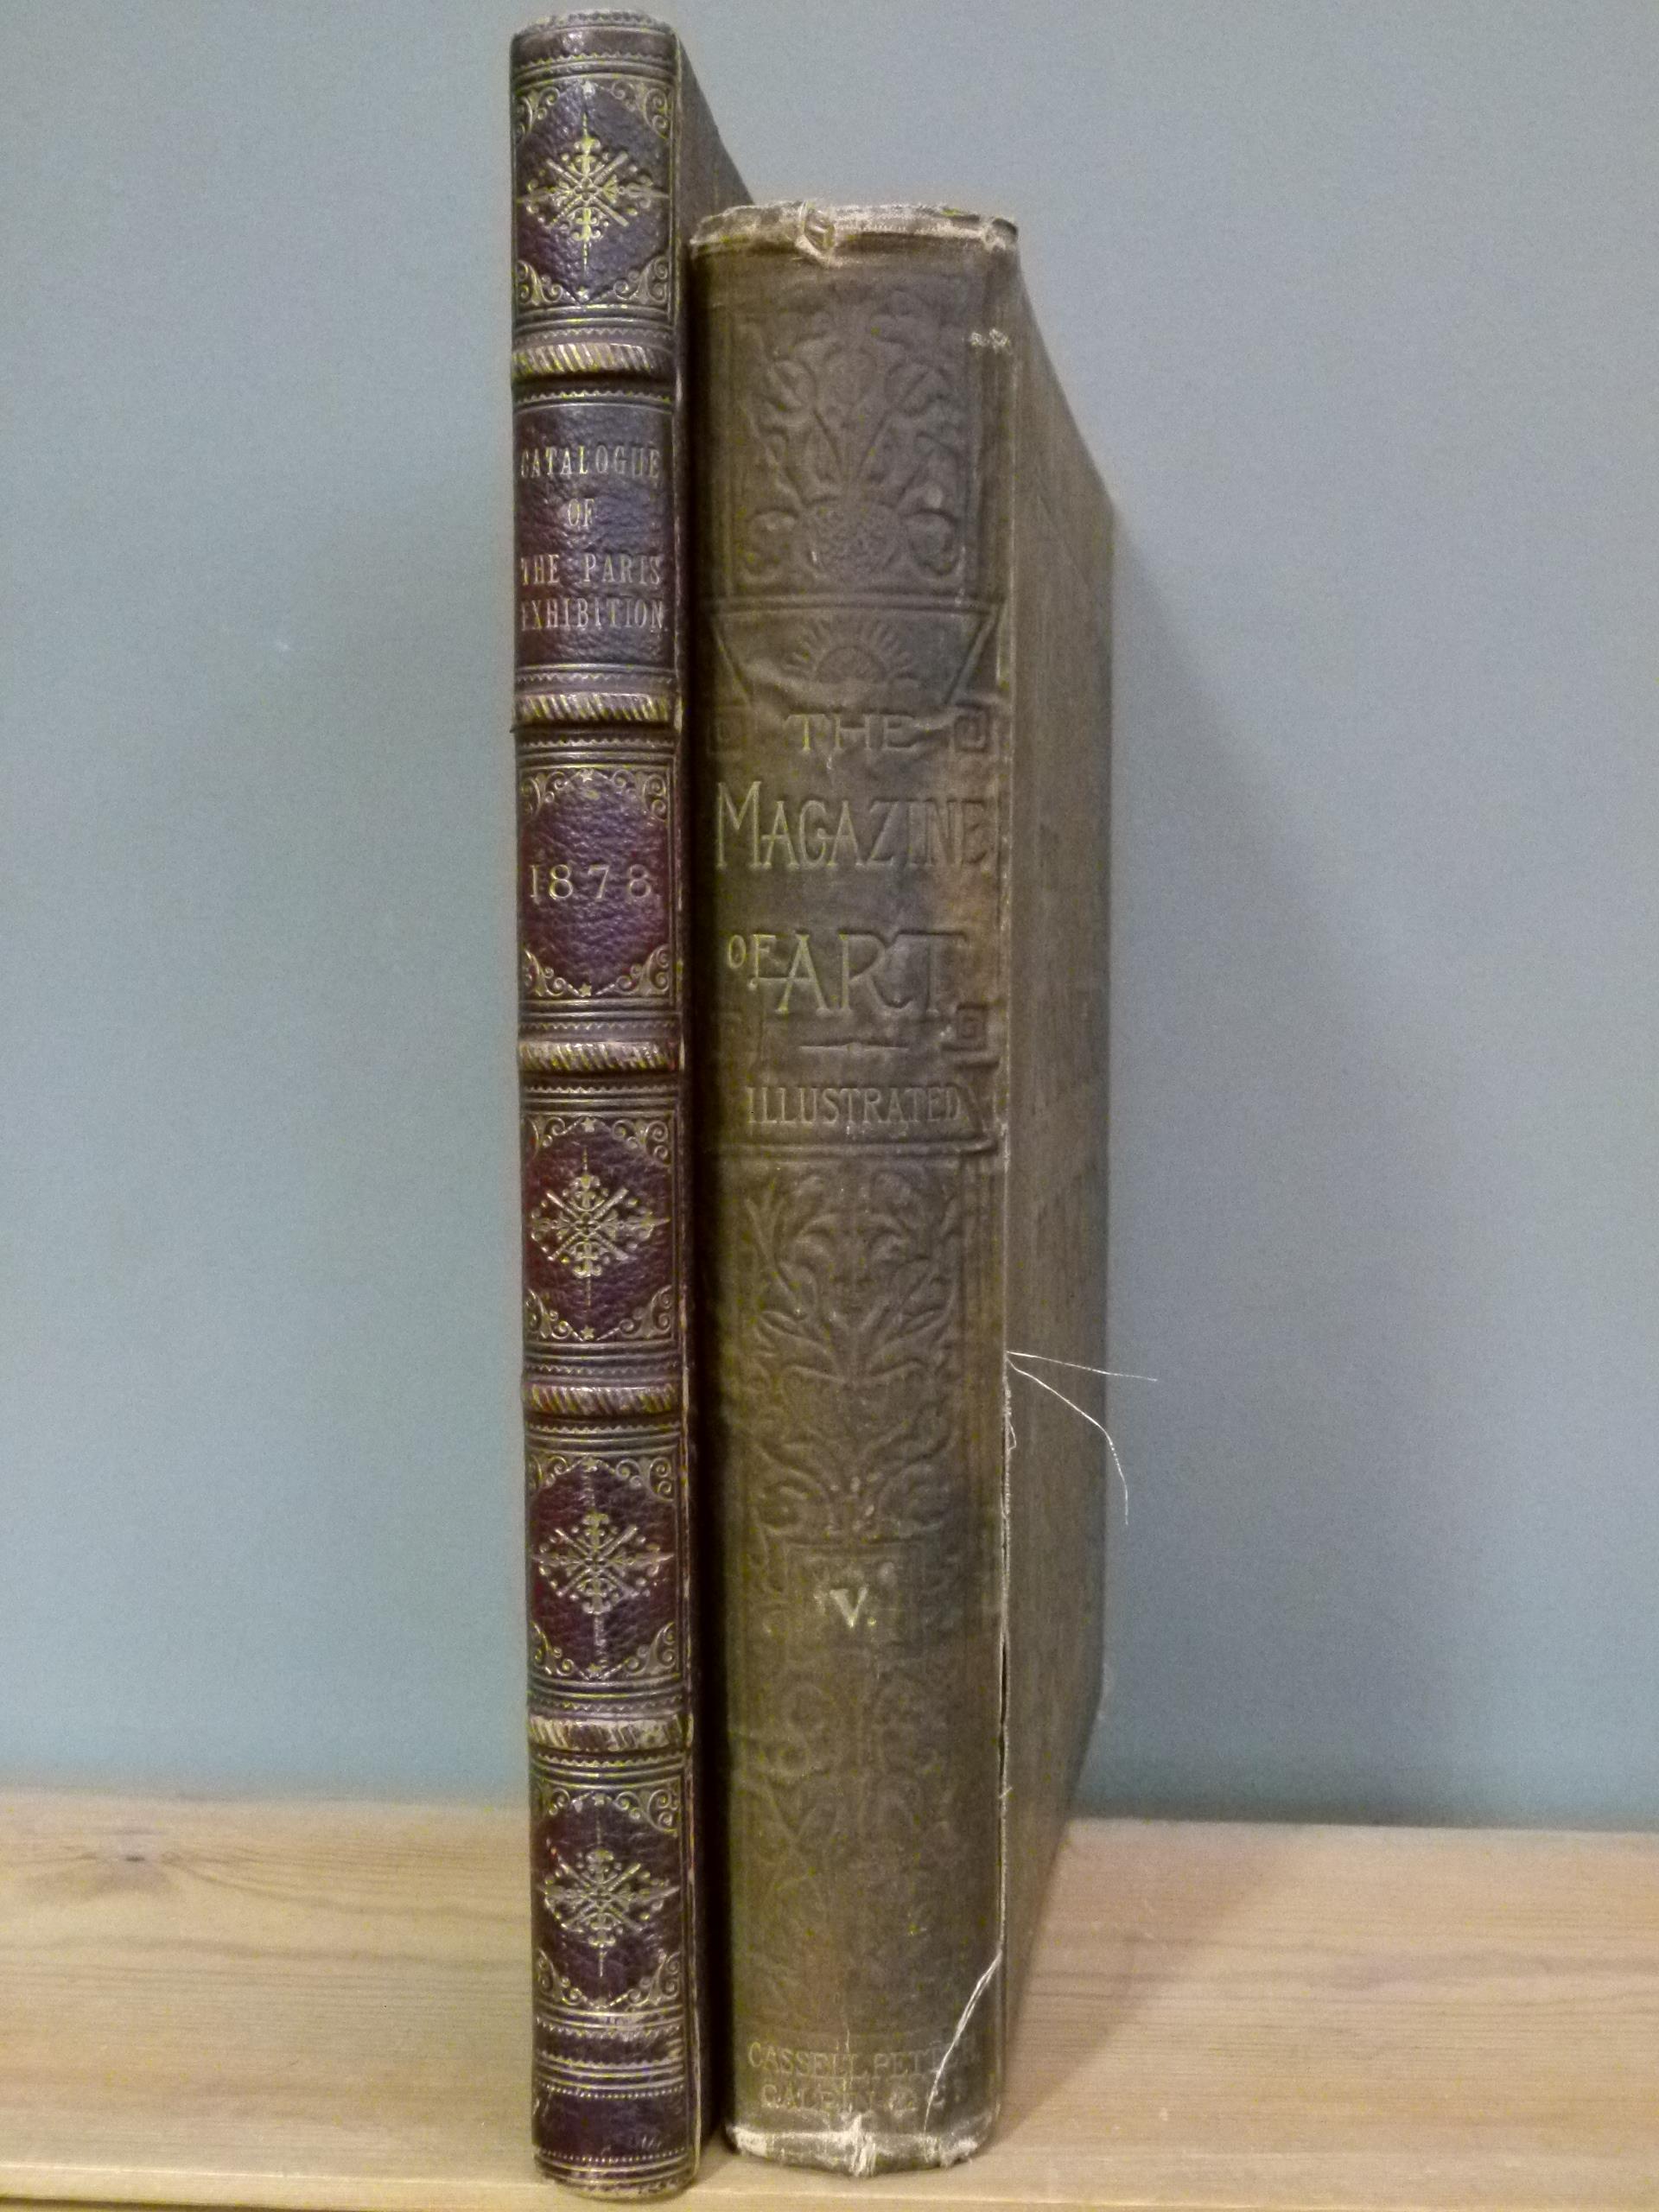 The Illustrated Catalogue of the Paris Exhibition. London, Virtue, 1878. Folio, illustrations in